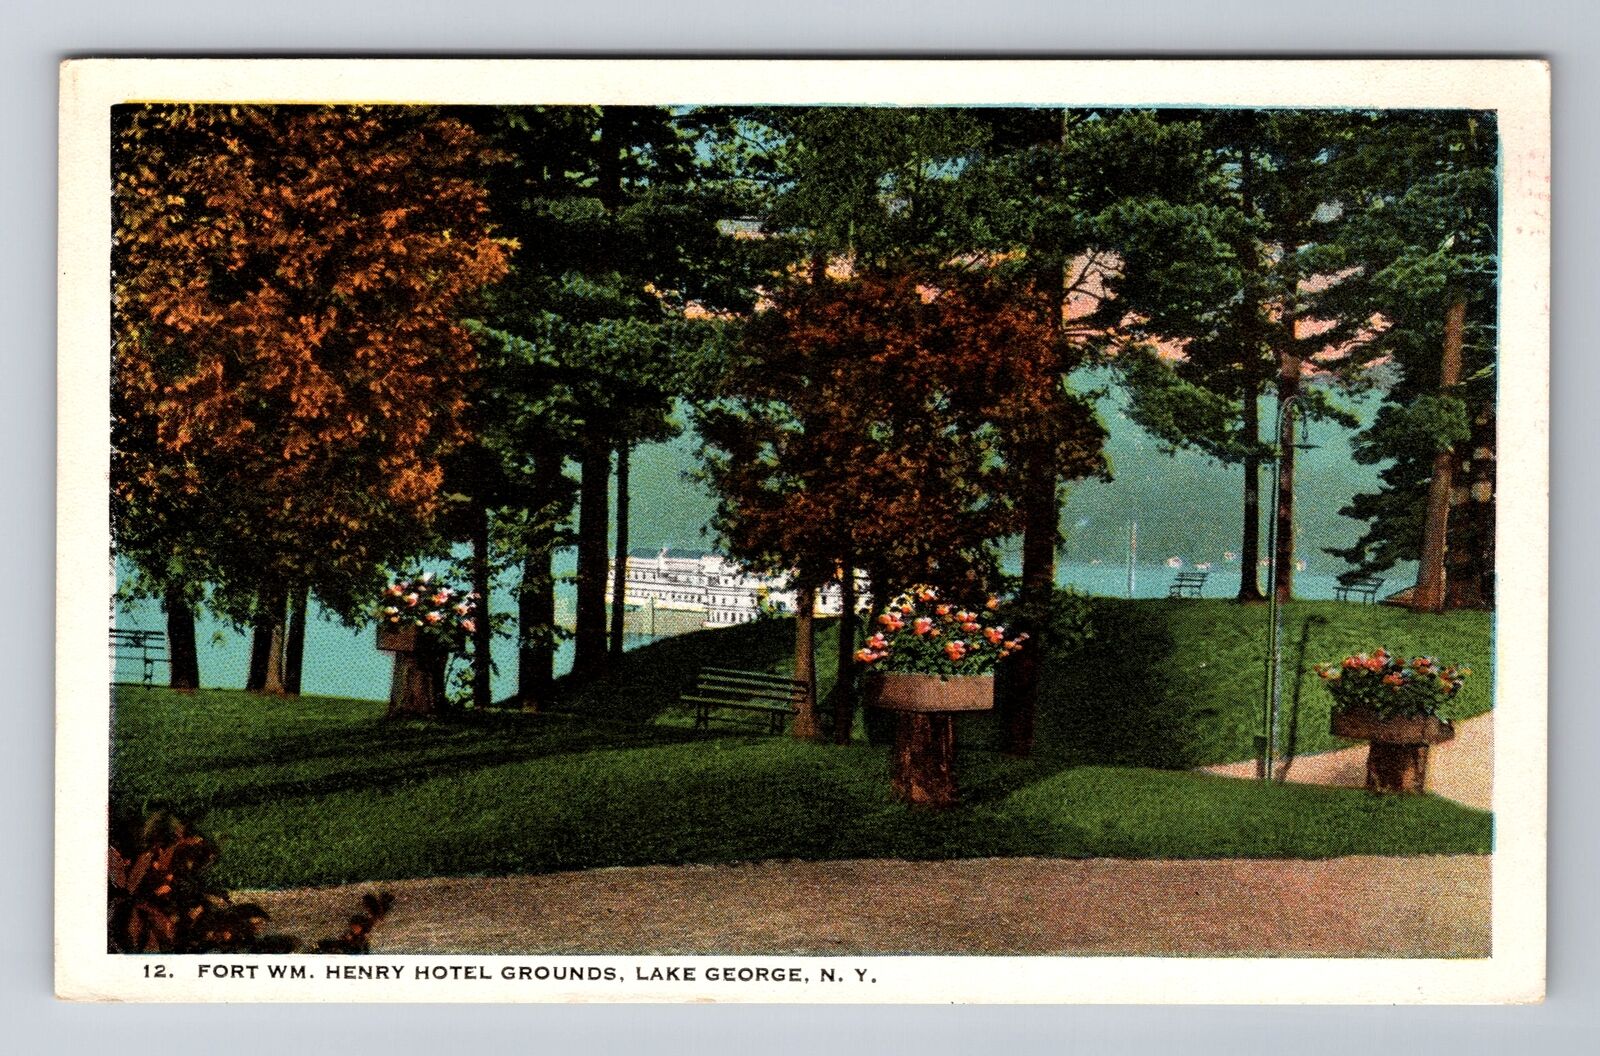 Lake George NY-New York, Ft Wm. Henry Hotel Grounds, Antique Vintage Postcard